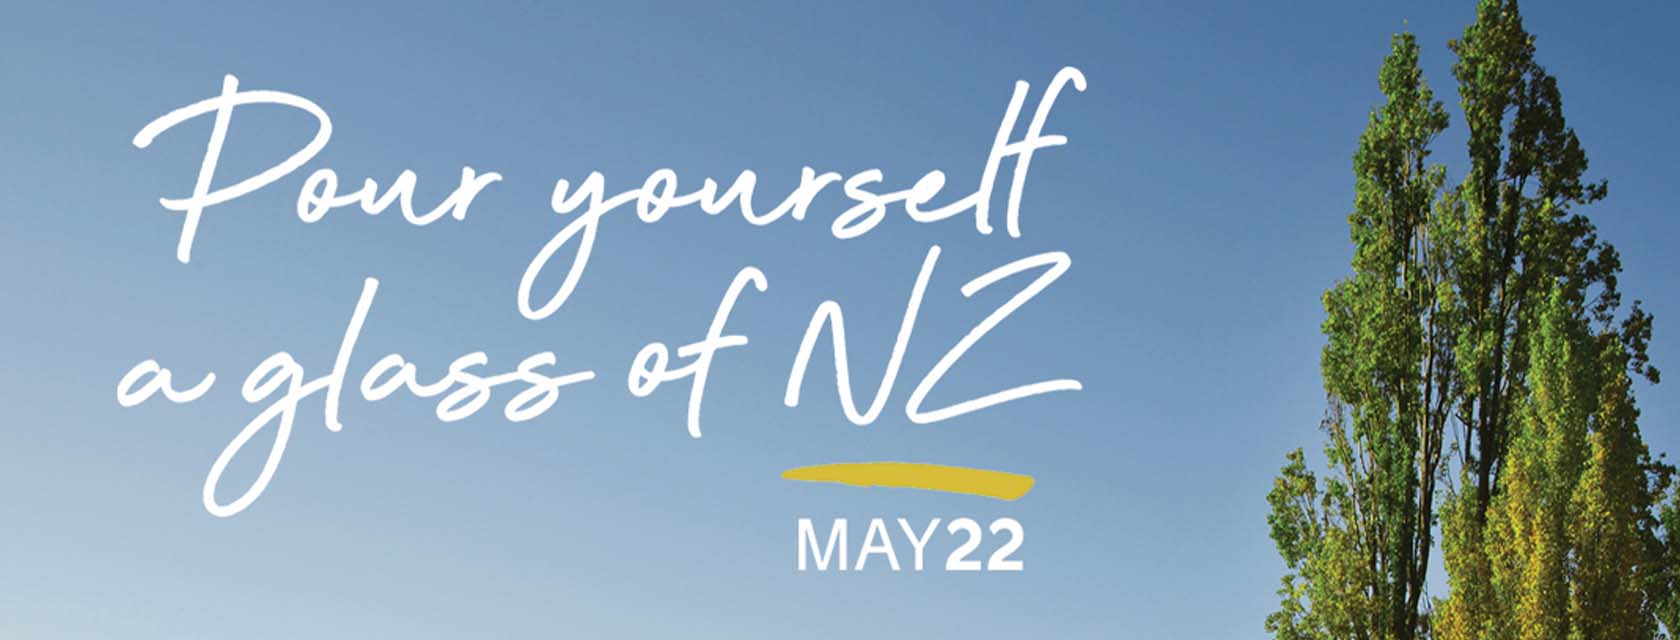 Glass of New Zealand Banner Image